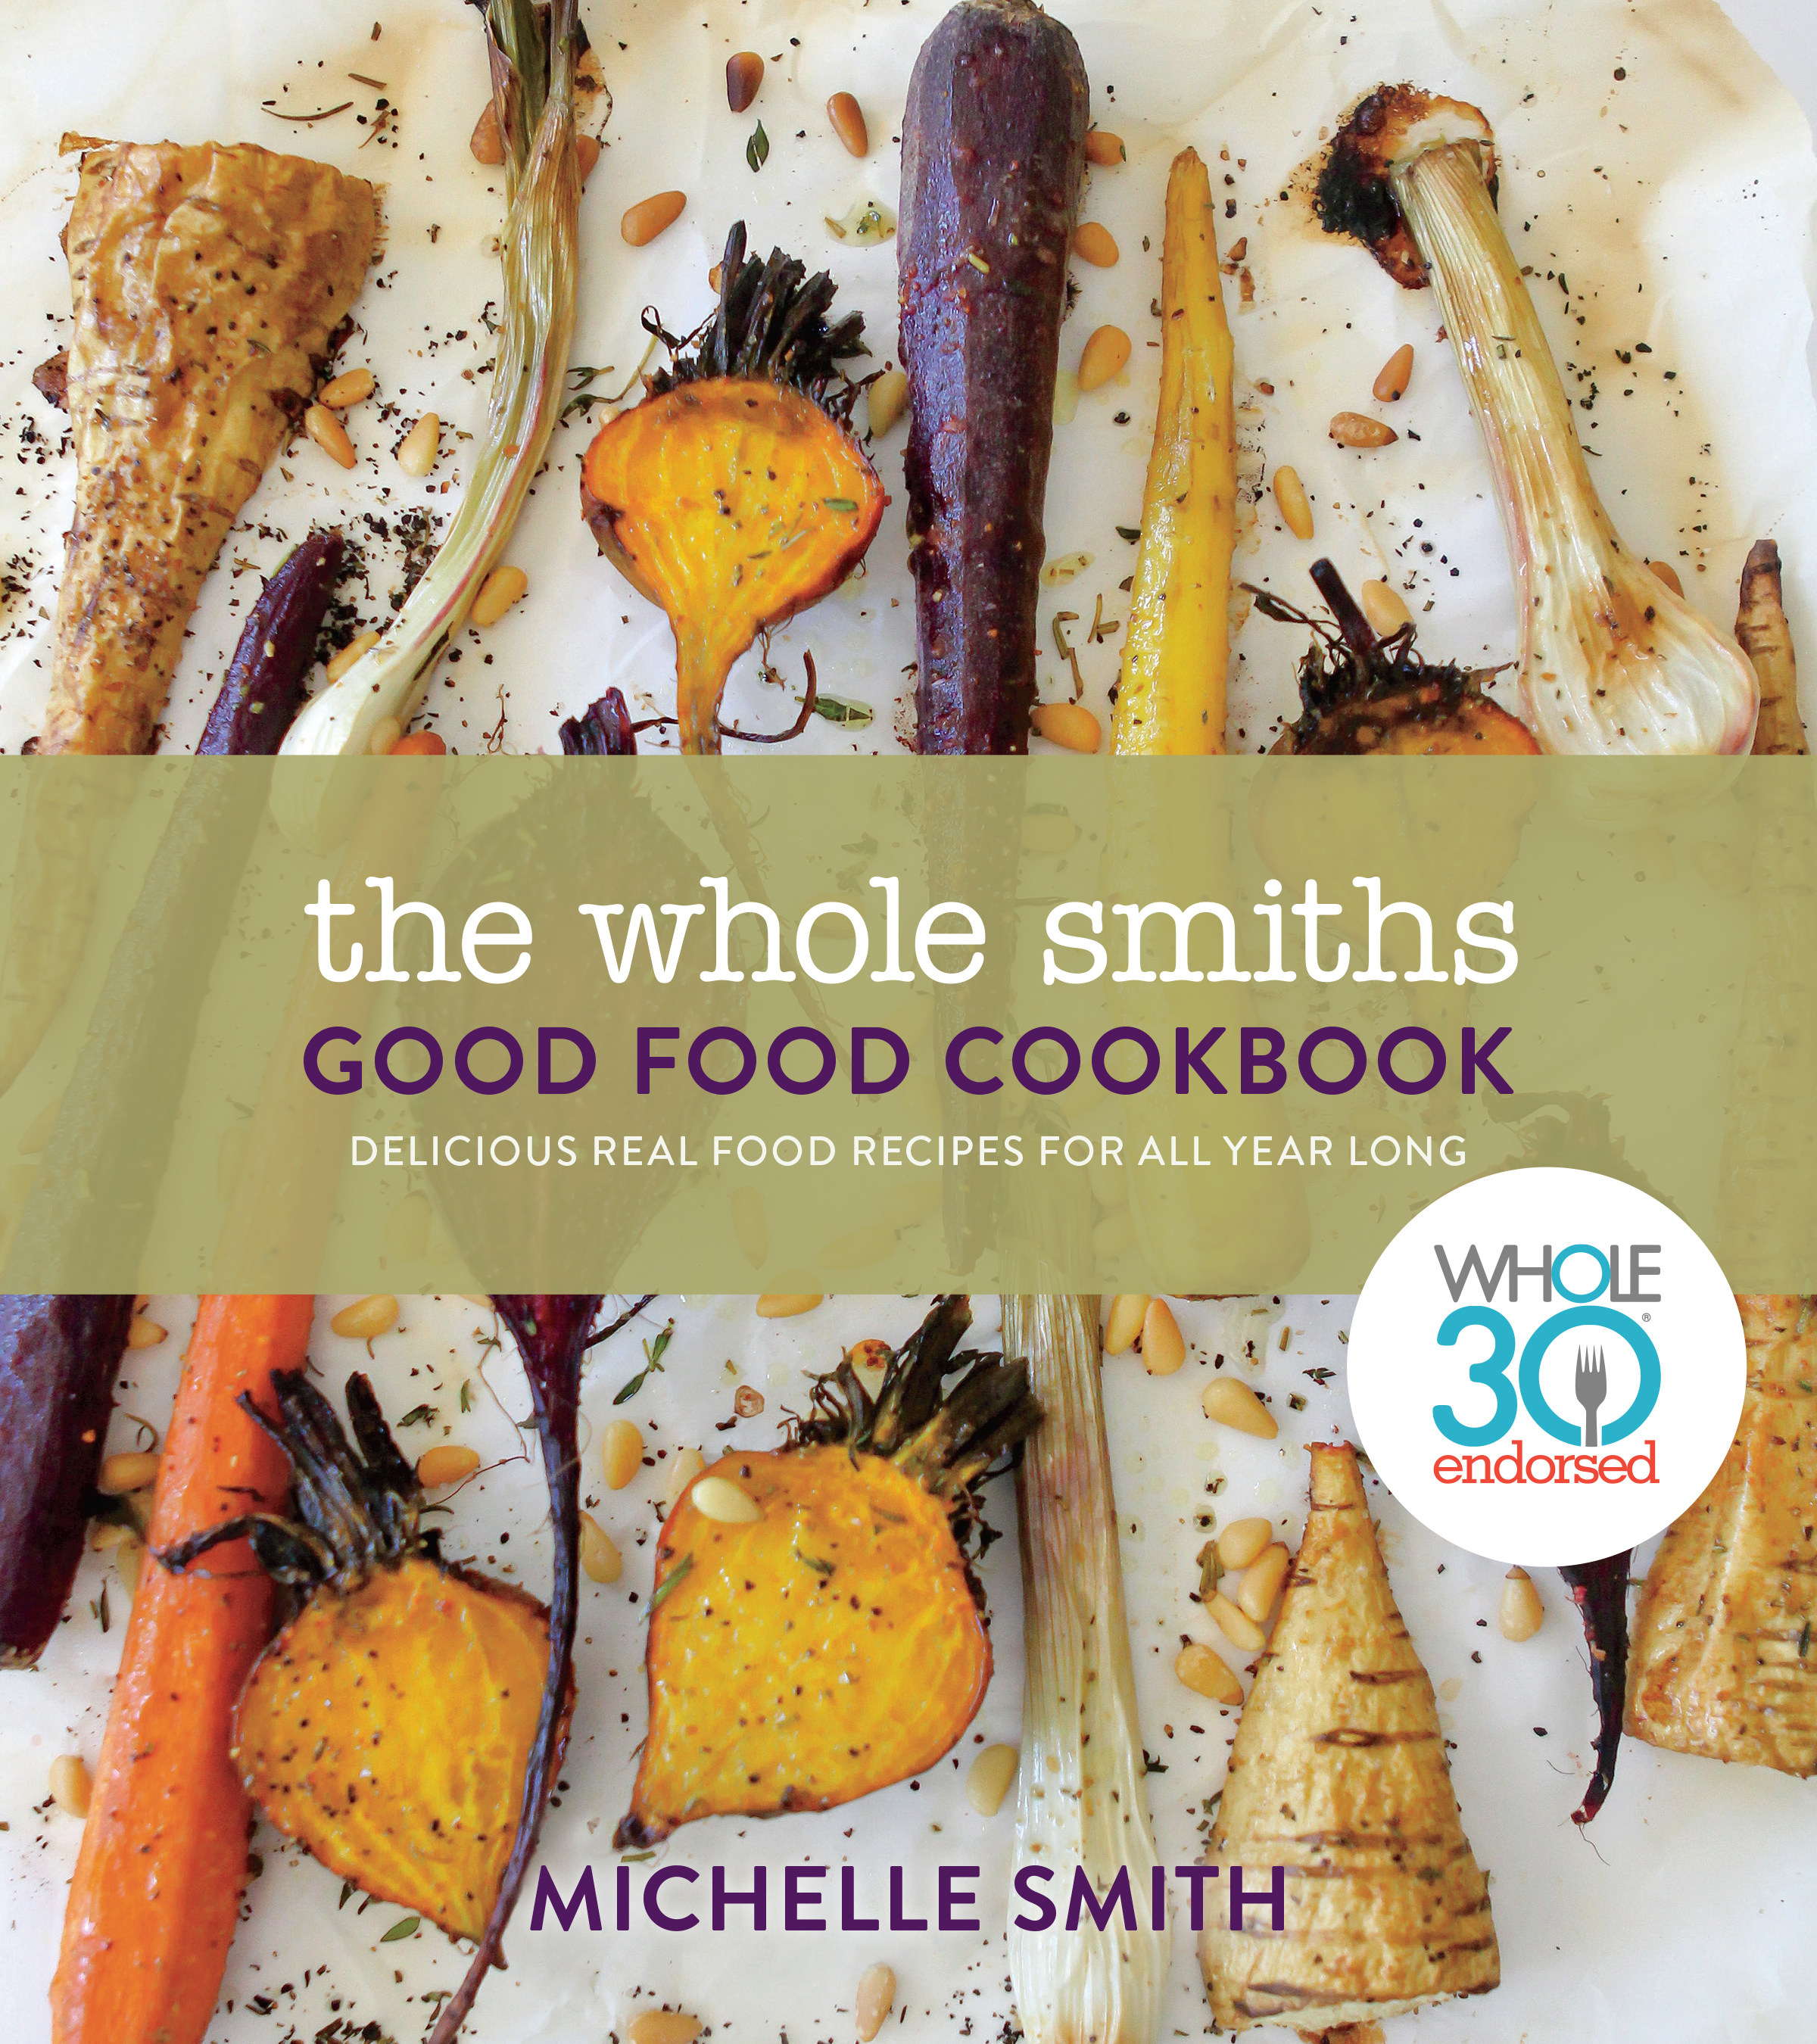 The Whole Smiths! Good Food Cookbook